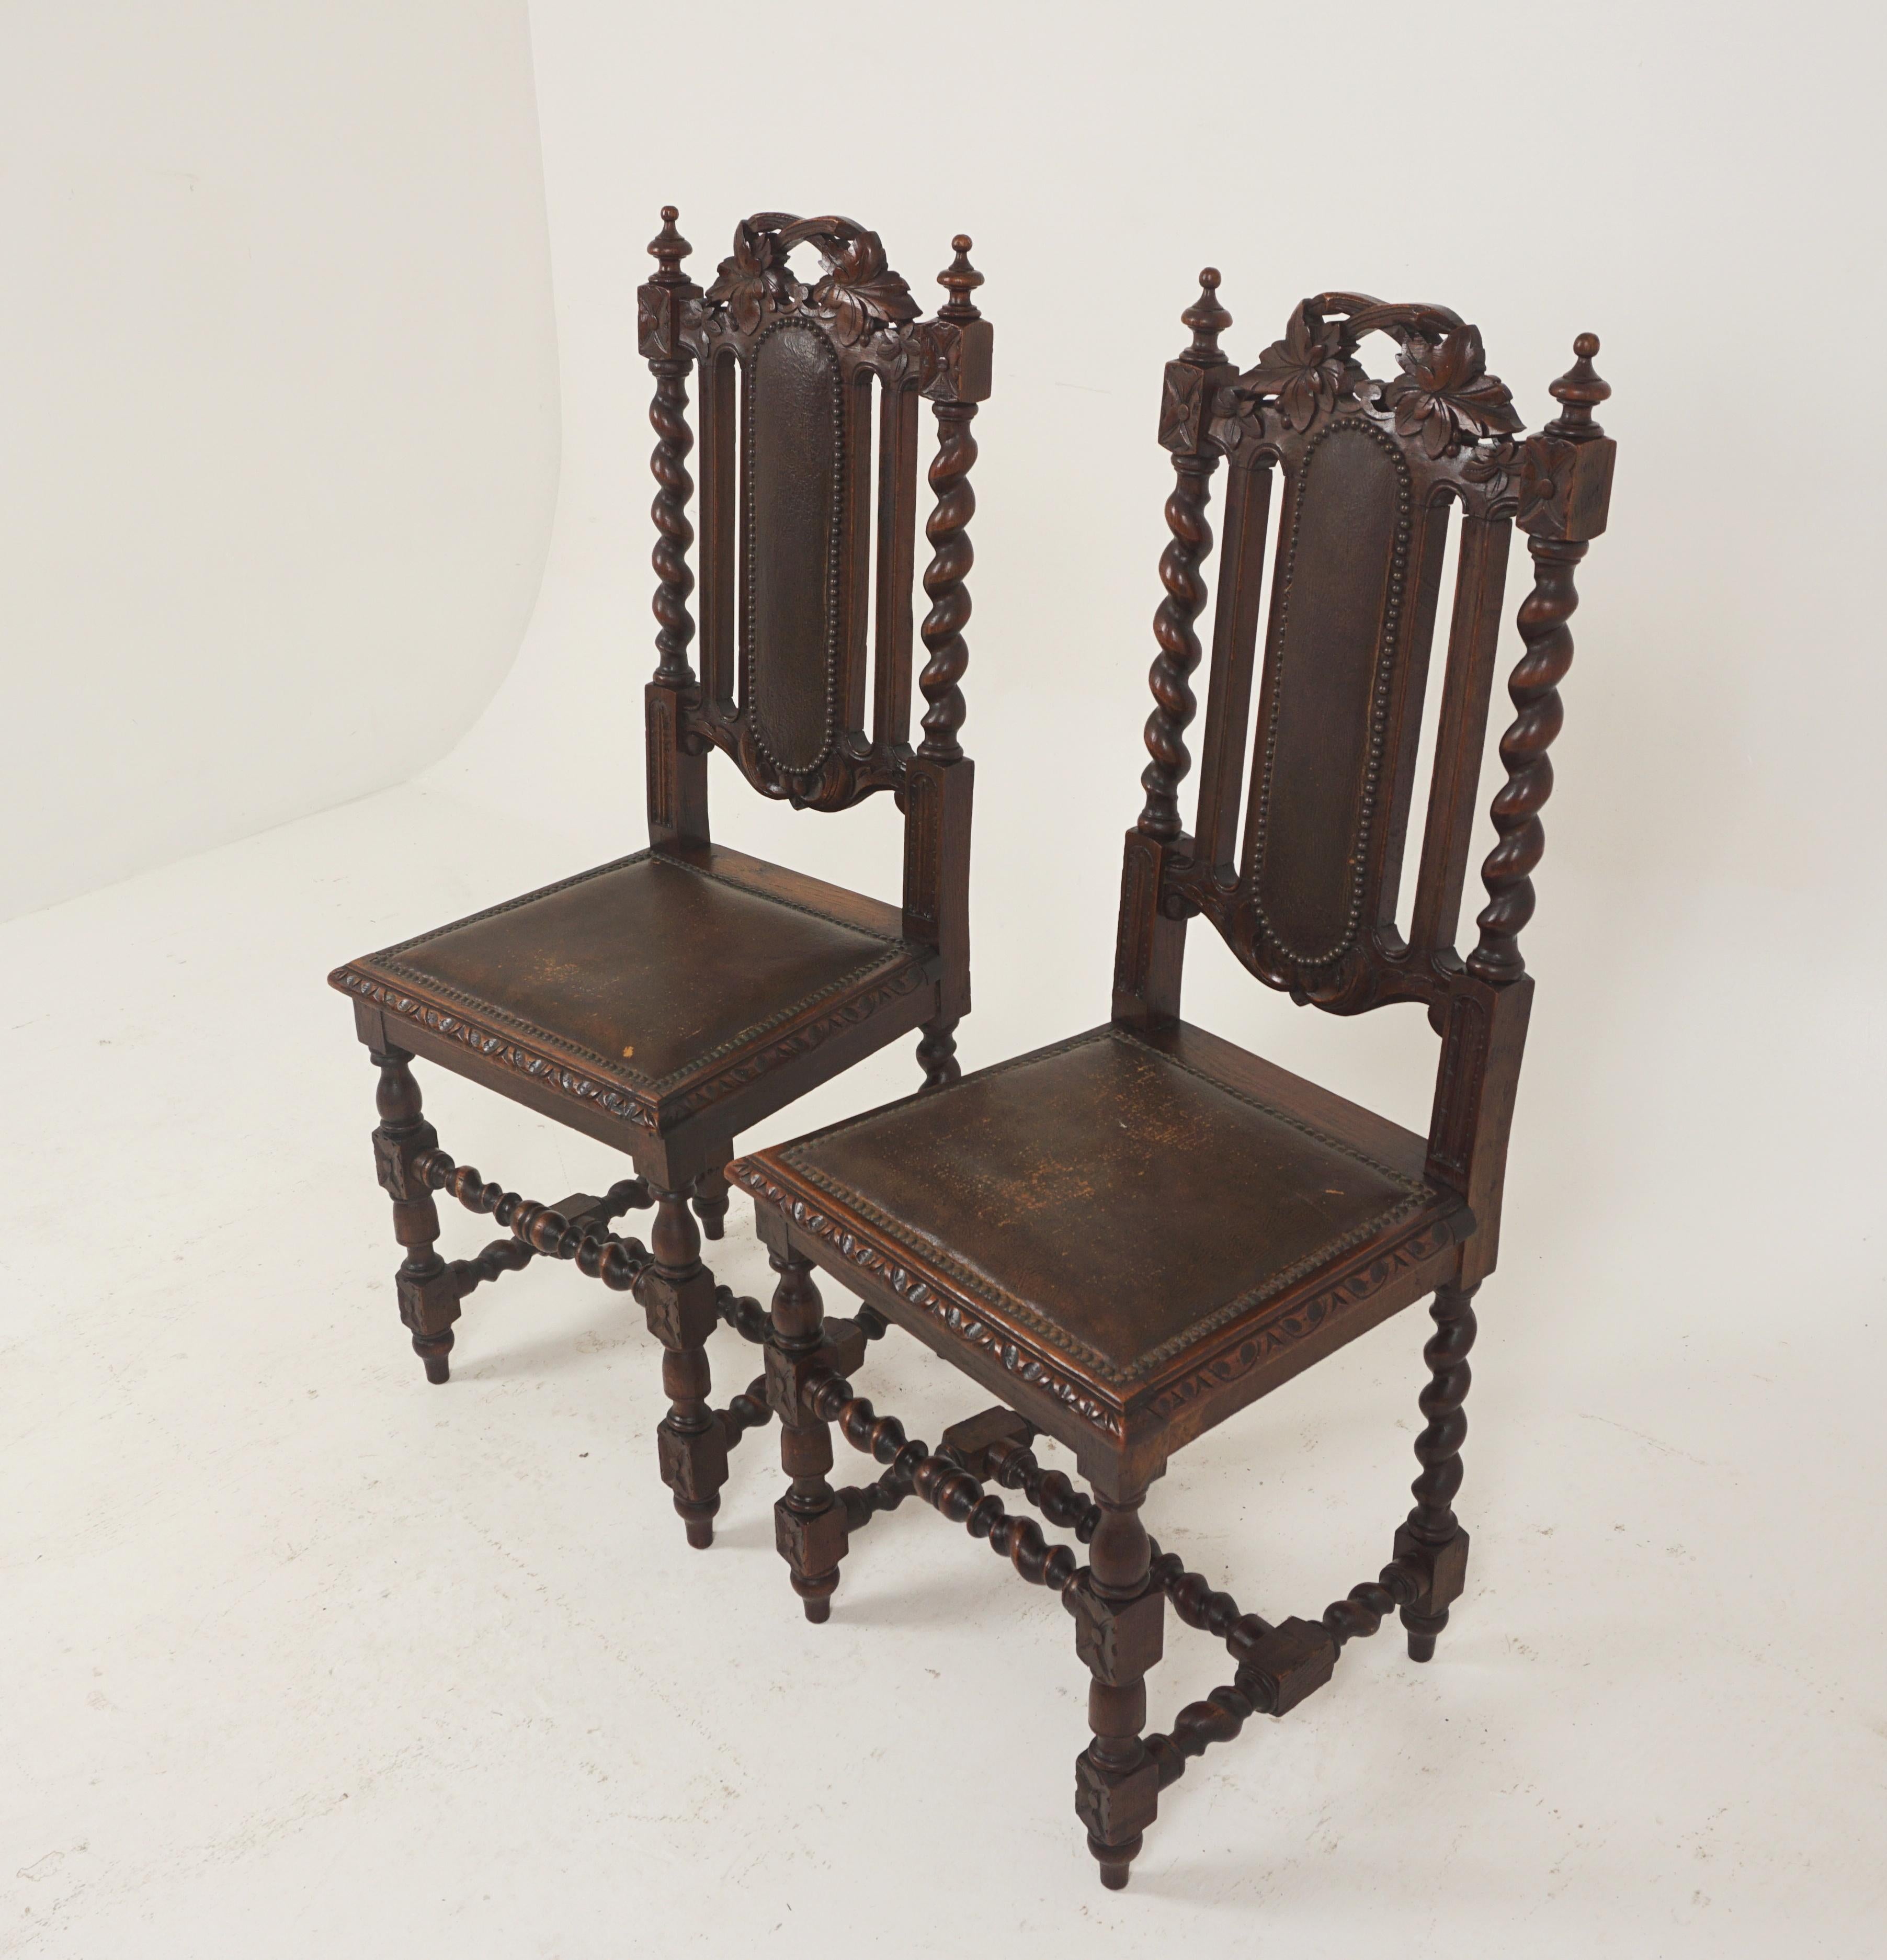 Pair of antique Victorian hall chairs, oak barley twist, Scotland 1880, B2632

Scotland 1880
Solid oak
Original finish
With superb foliage carving to the top
Barley twist supports on the ends
Leather padded back also with leather upholstered